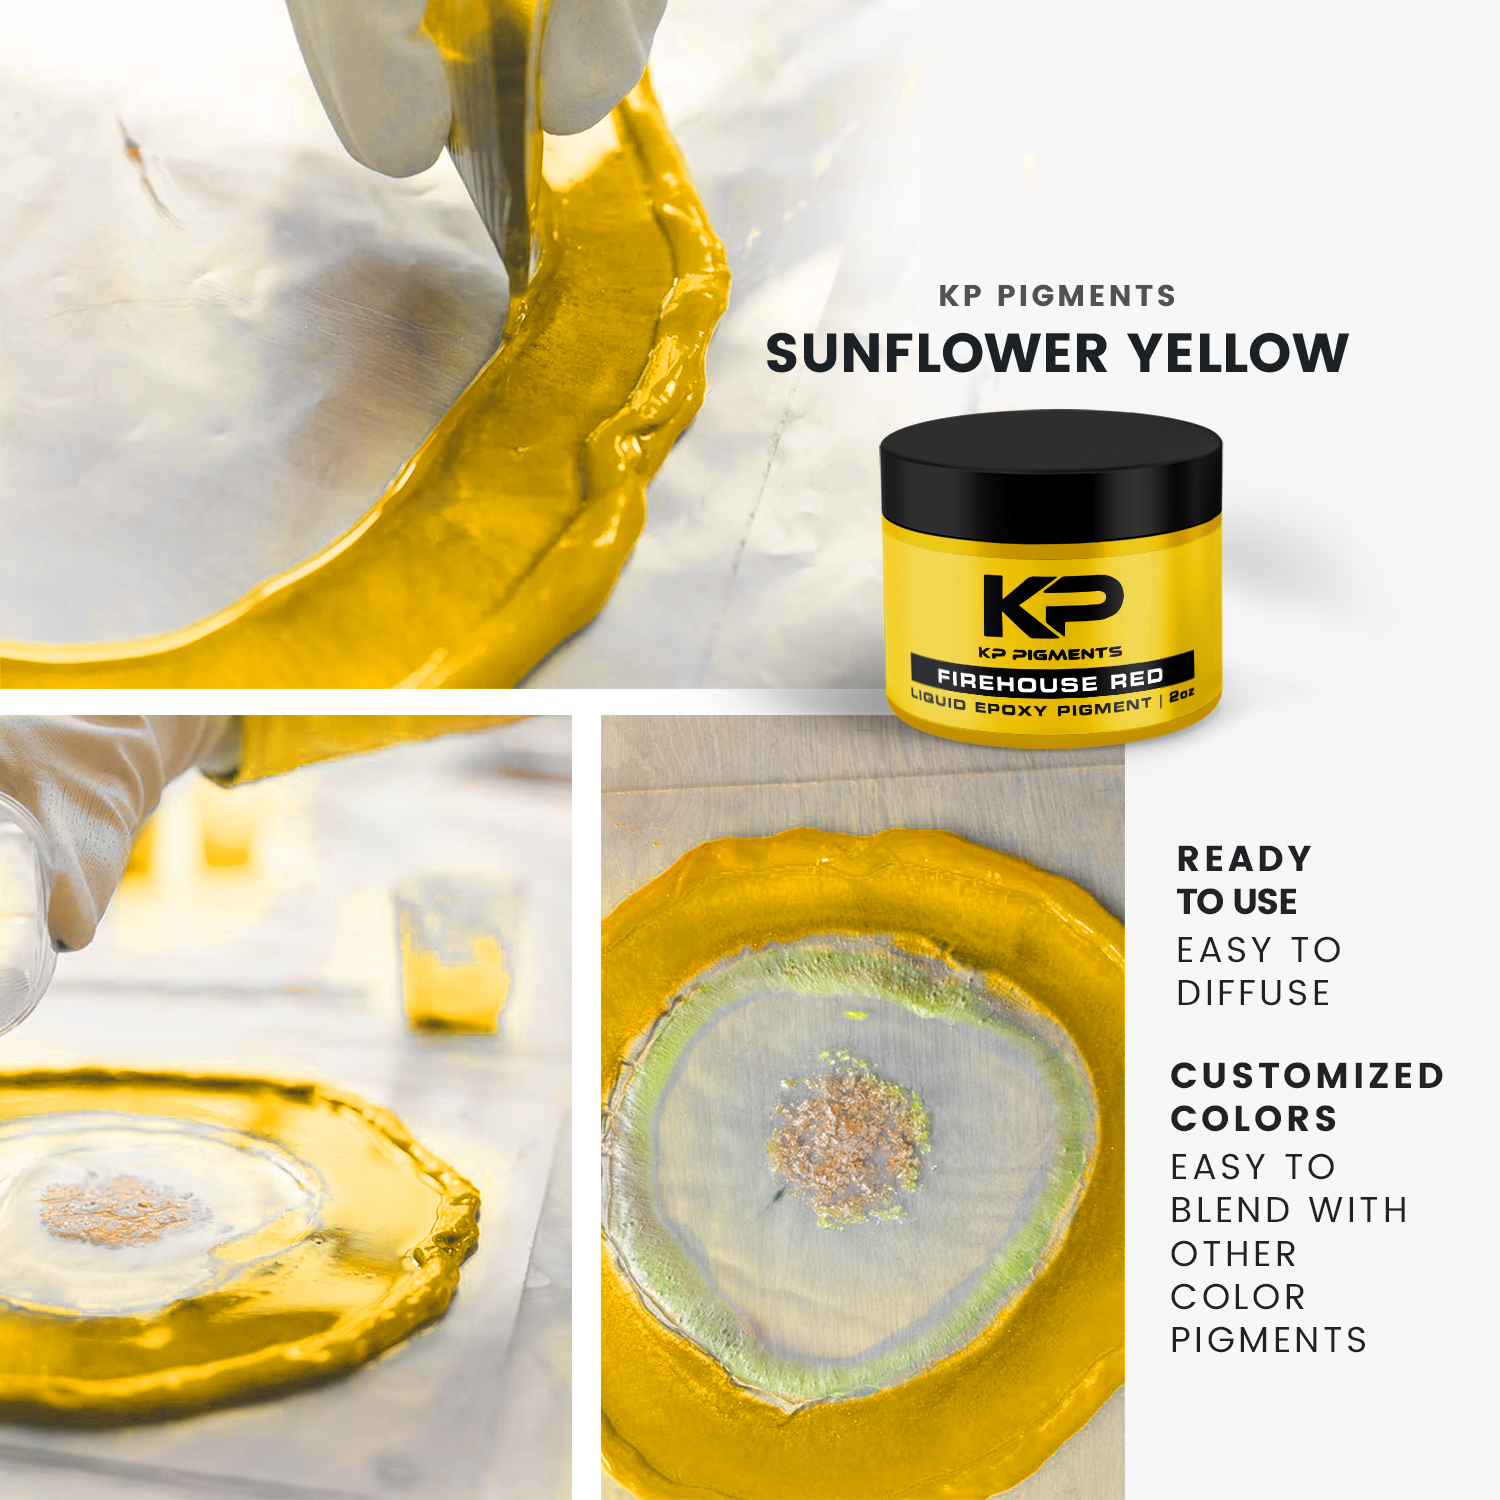 Load image into Gallery viewer, Sunflower Yellow - Epoxy Pigment Paste for Epoxy Resin, Tint/Pigment Paste with Spoon for Arts and Crafts, Jewelry, Resin Woodworking and More!